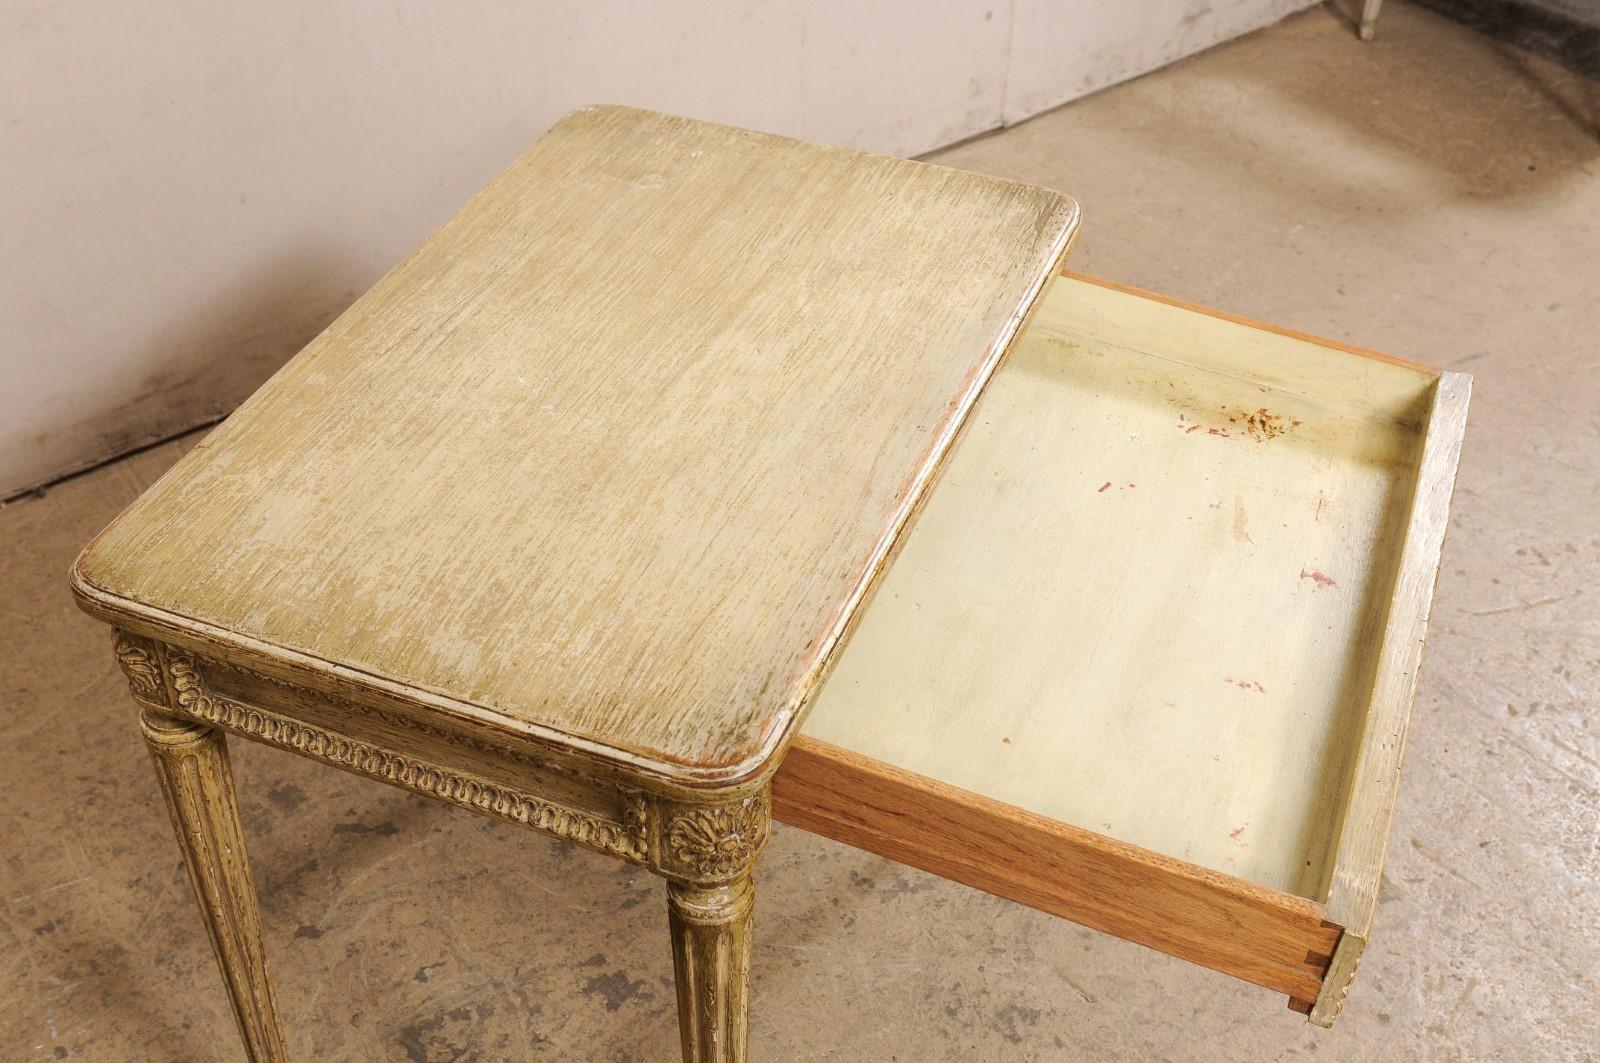 Wood Louis XVI Style French Side Table with its Original Painted Finish Early 20th C. For Sale